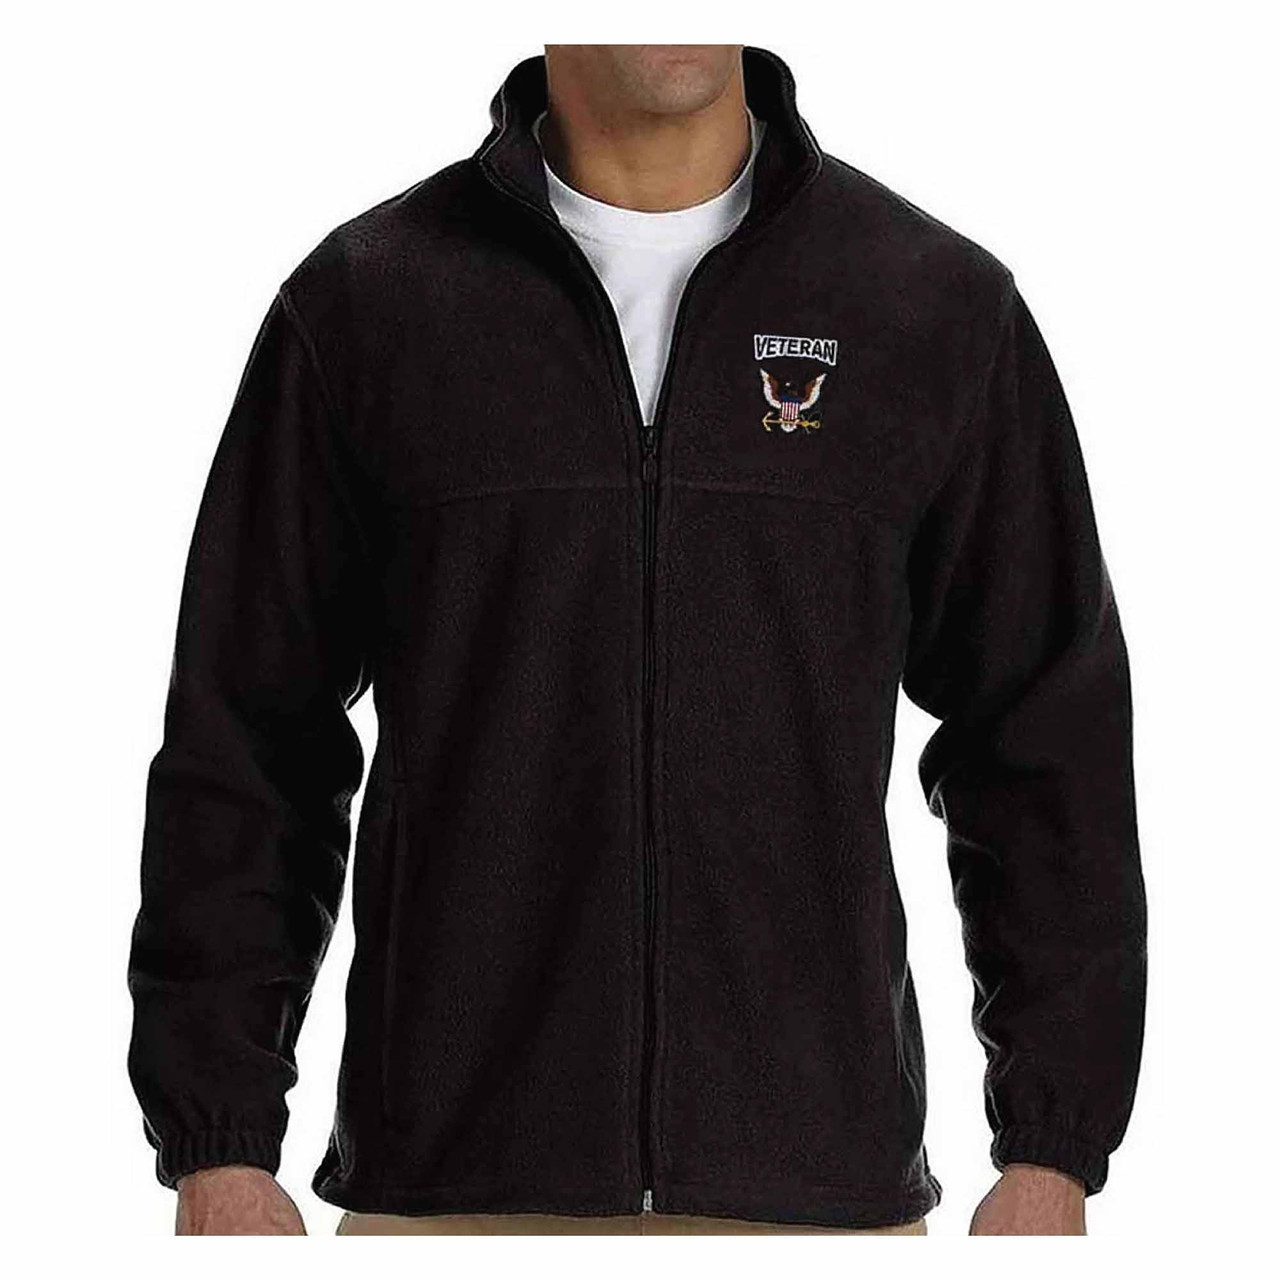 Officially Licensed US Navy Veteran Embroidered with Eagle and Anchor and Veteran text black fleece zip up jacket - front view